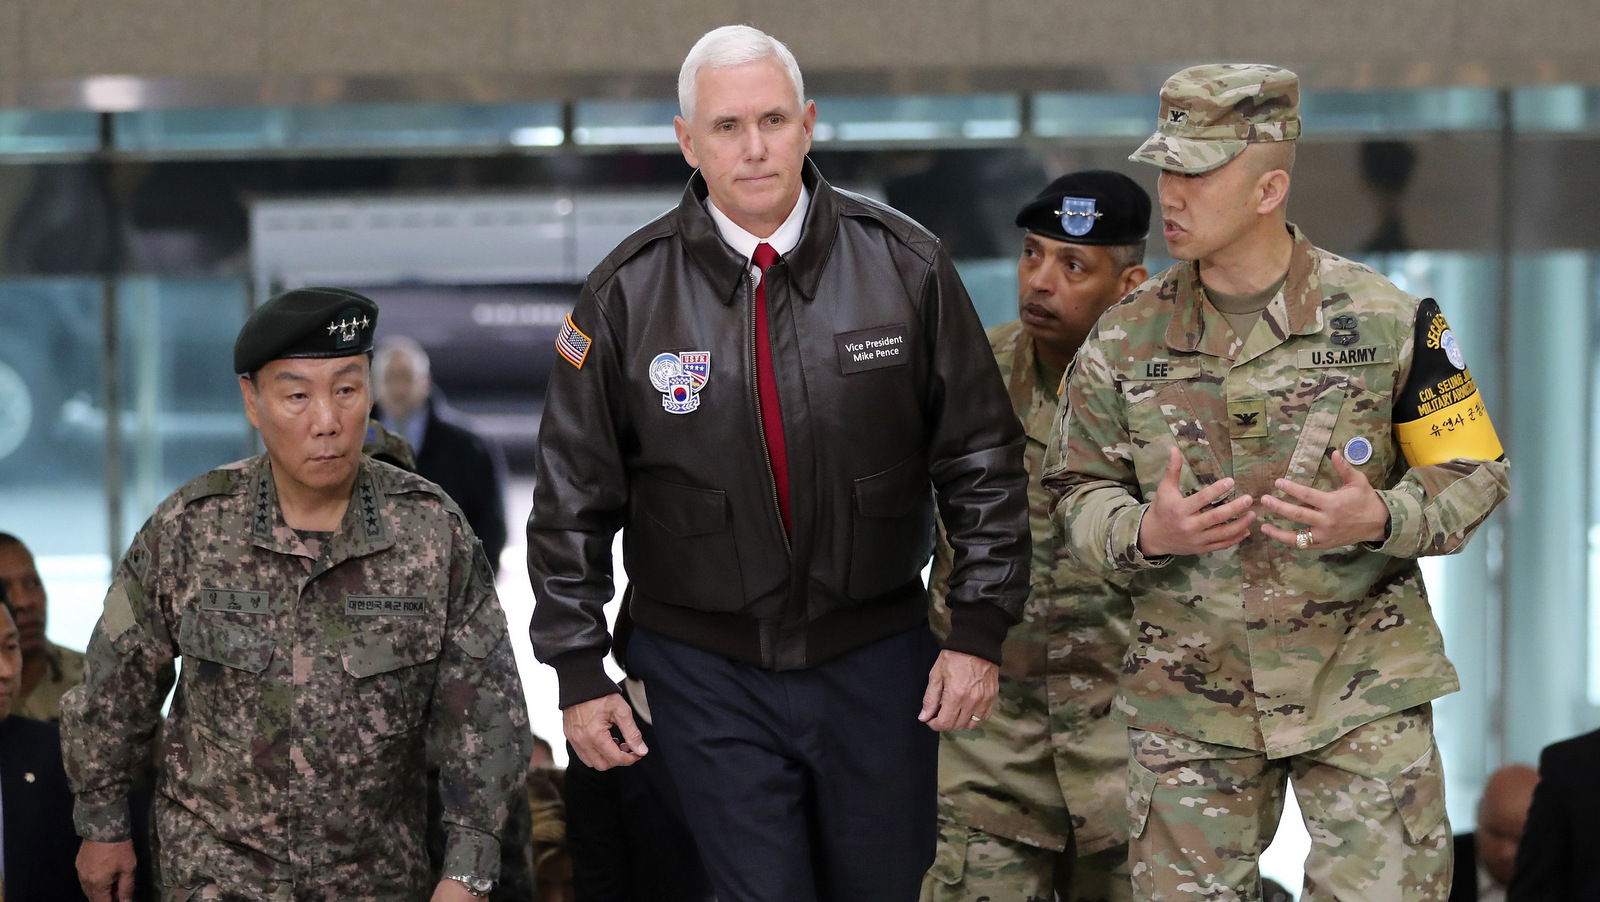 U.S. Vice President Mike Pence arrives at the border village of Panmunjom in the Demilitarized Zone (DMZ) which has separated the two Koreas since the Korean War, South Korea, Monday, April 17, 2017. (AP/Lee Jin-man)